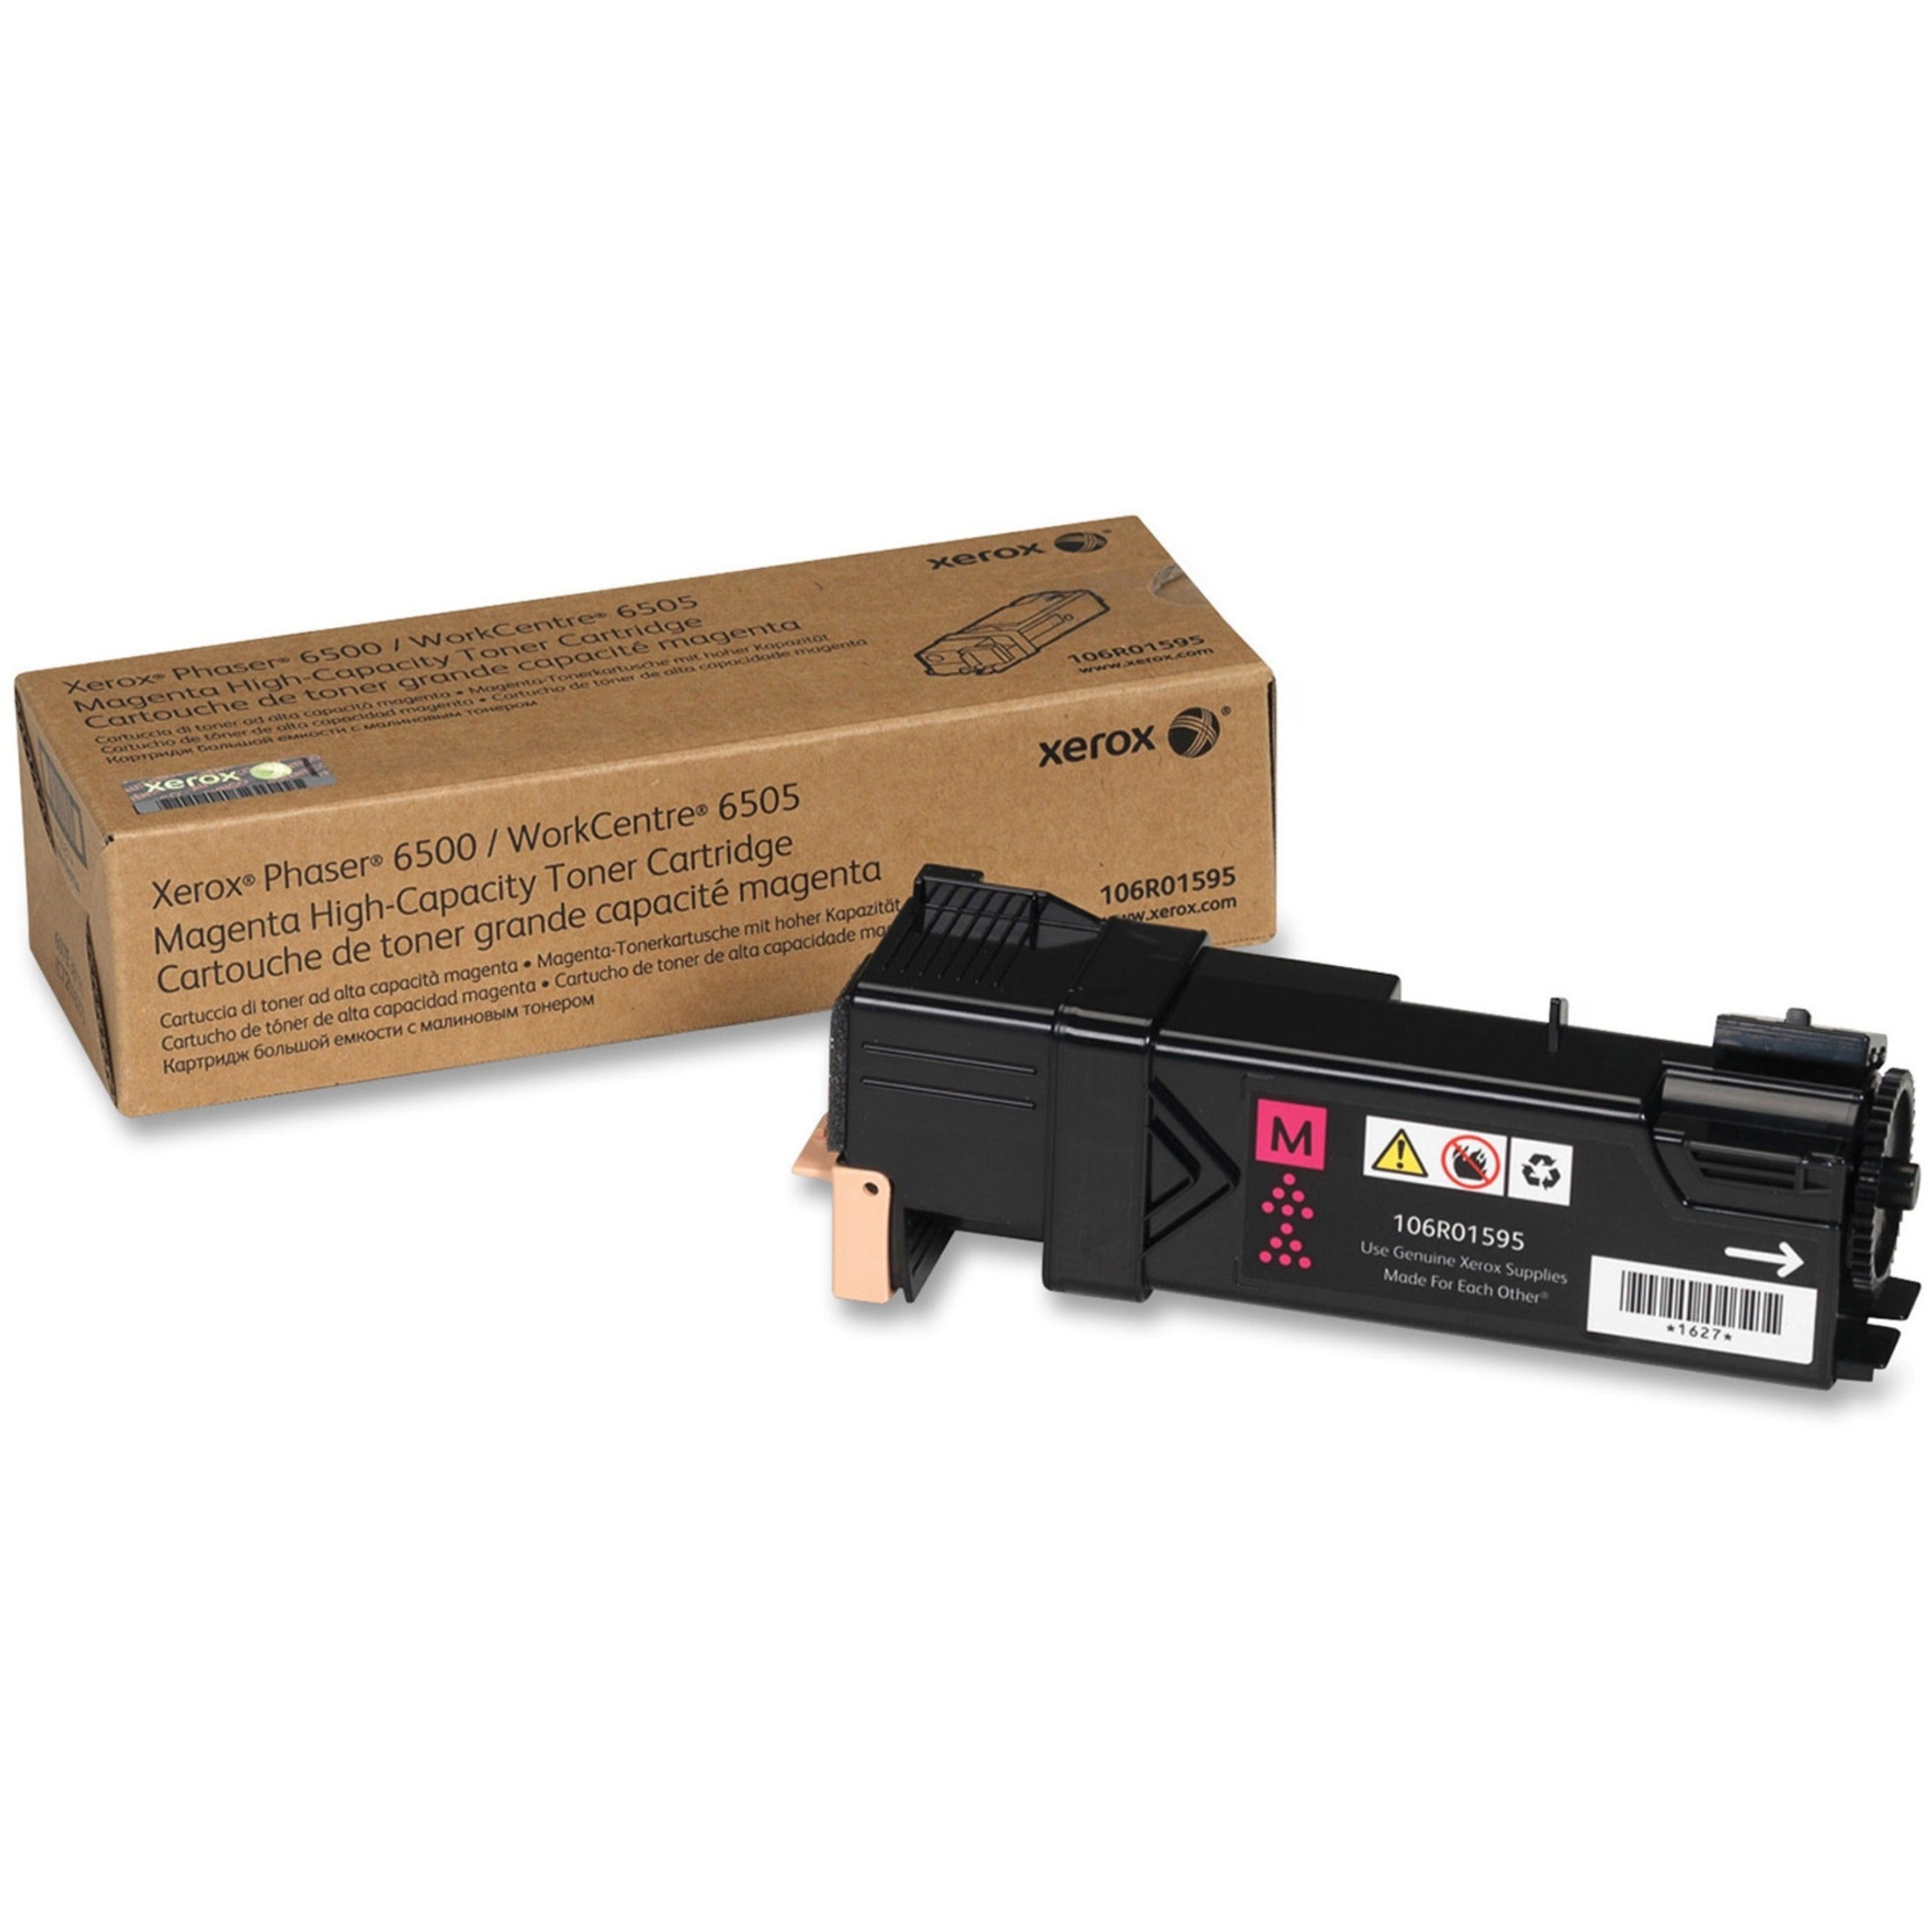 Xerox 106R01595 Phaser 6500/WC 6505 High Capacity Toner Cartridge, Magenta, 2500 Pages